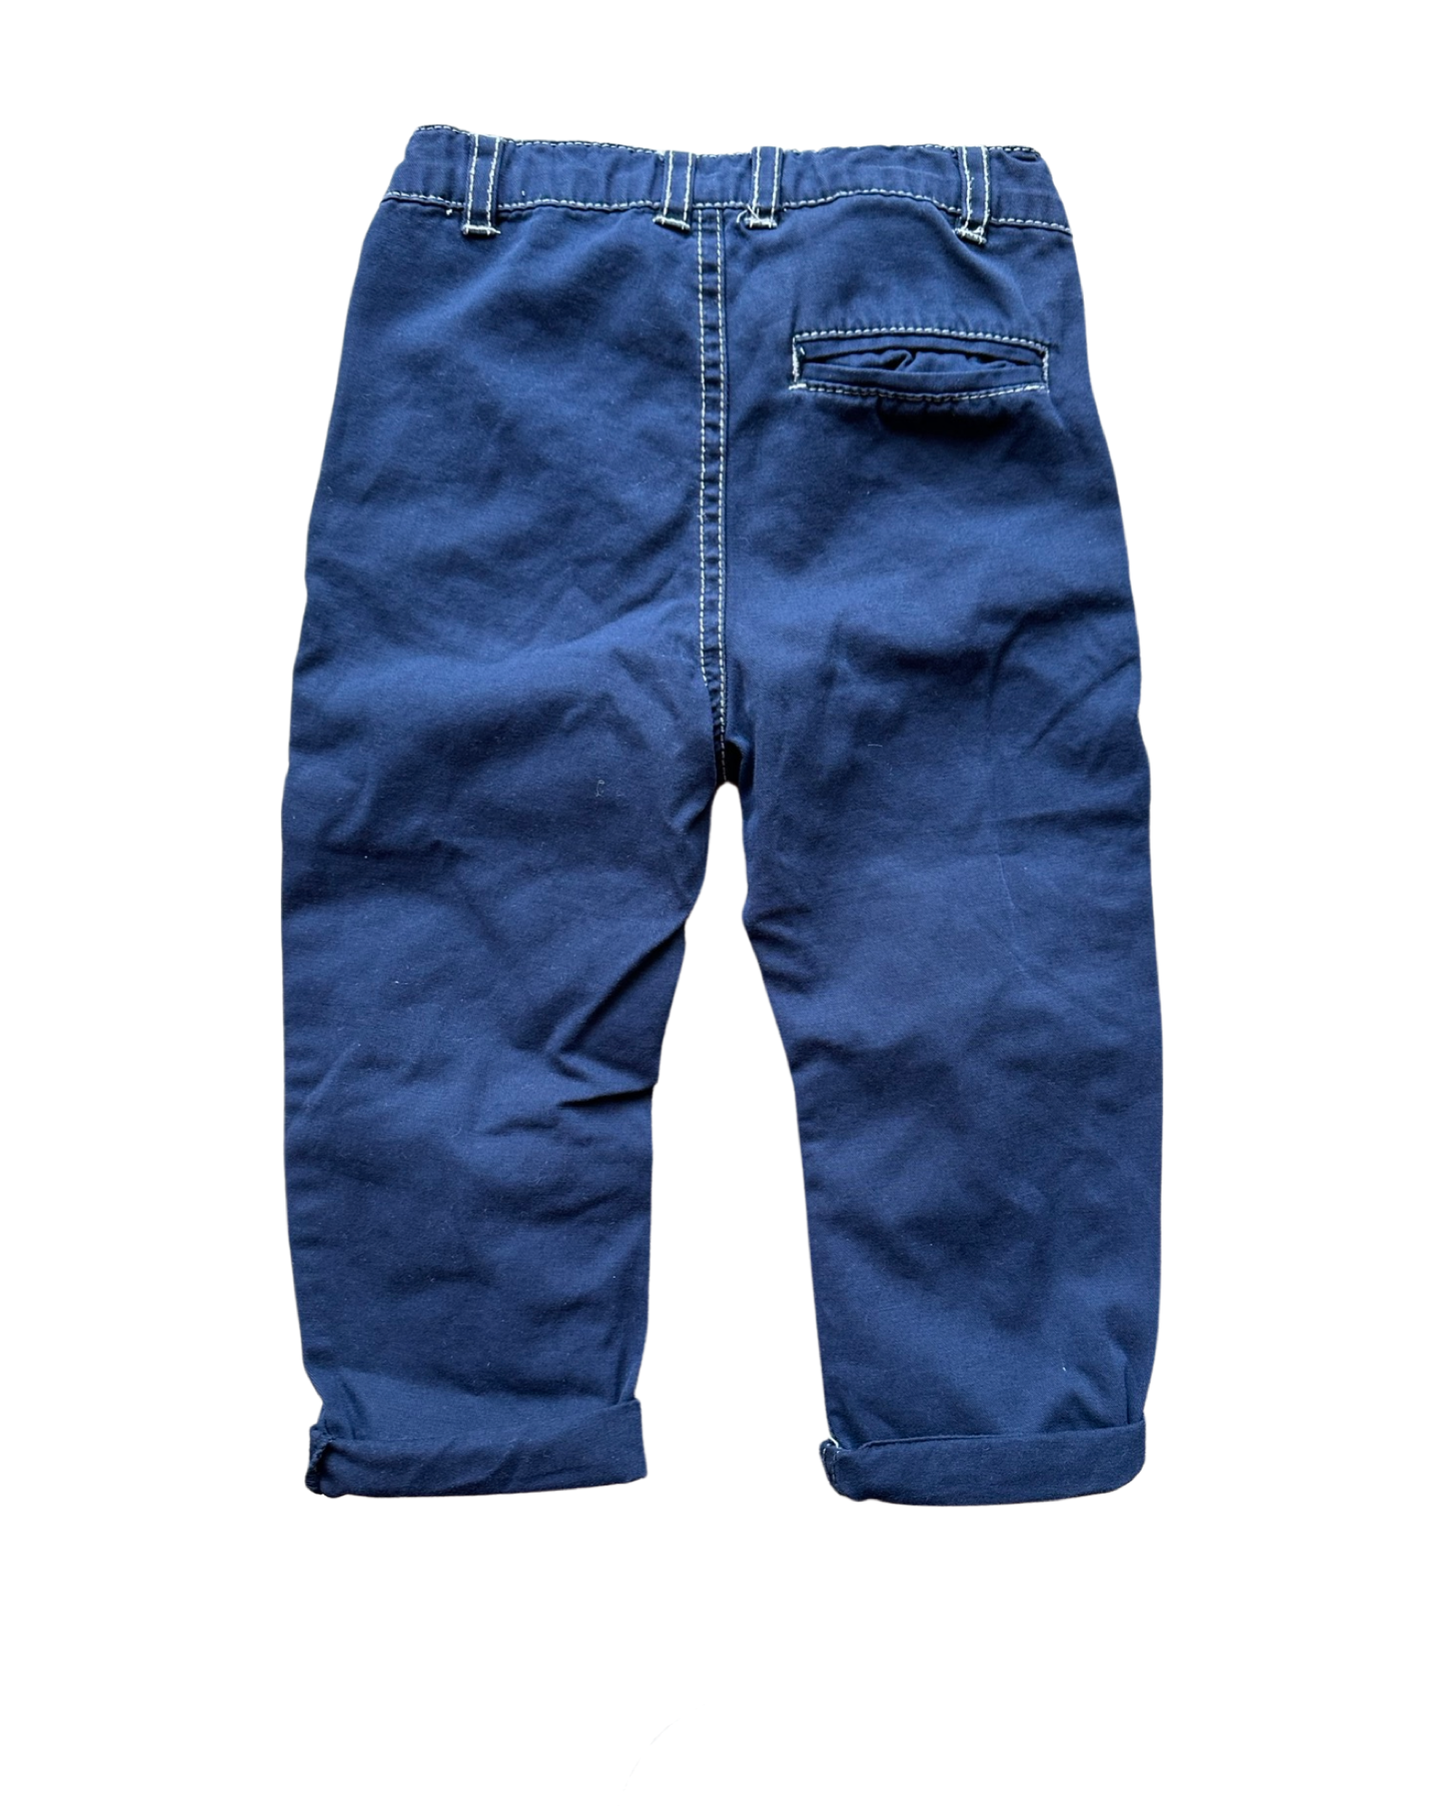 Mothercare navy cotton trousers (size 12-18mths)